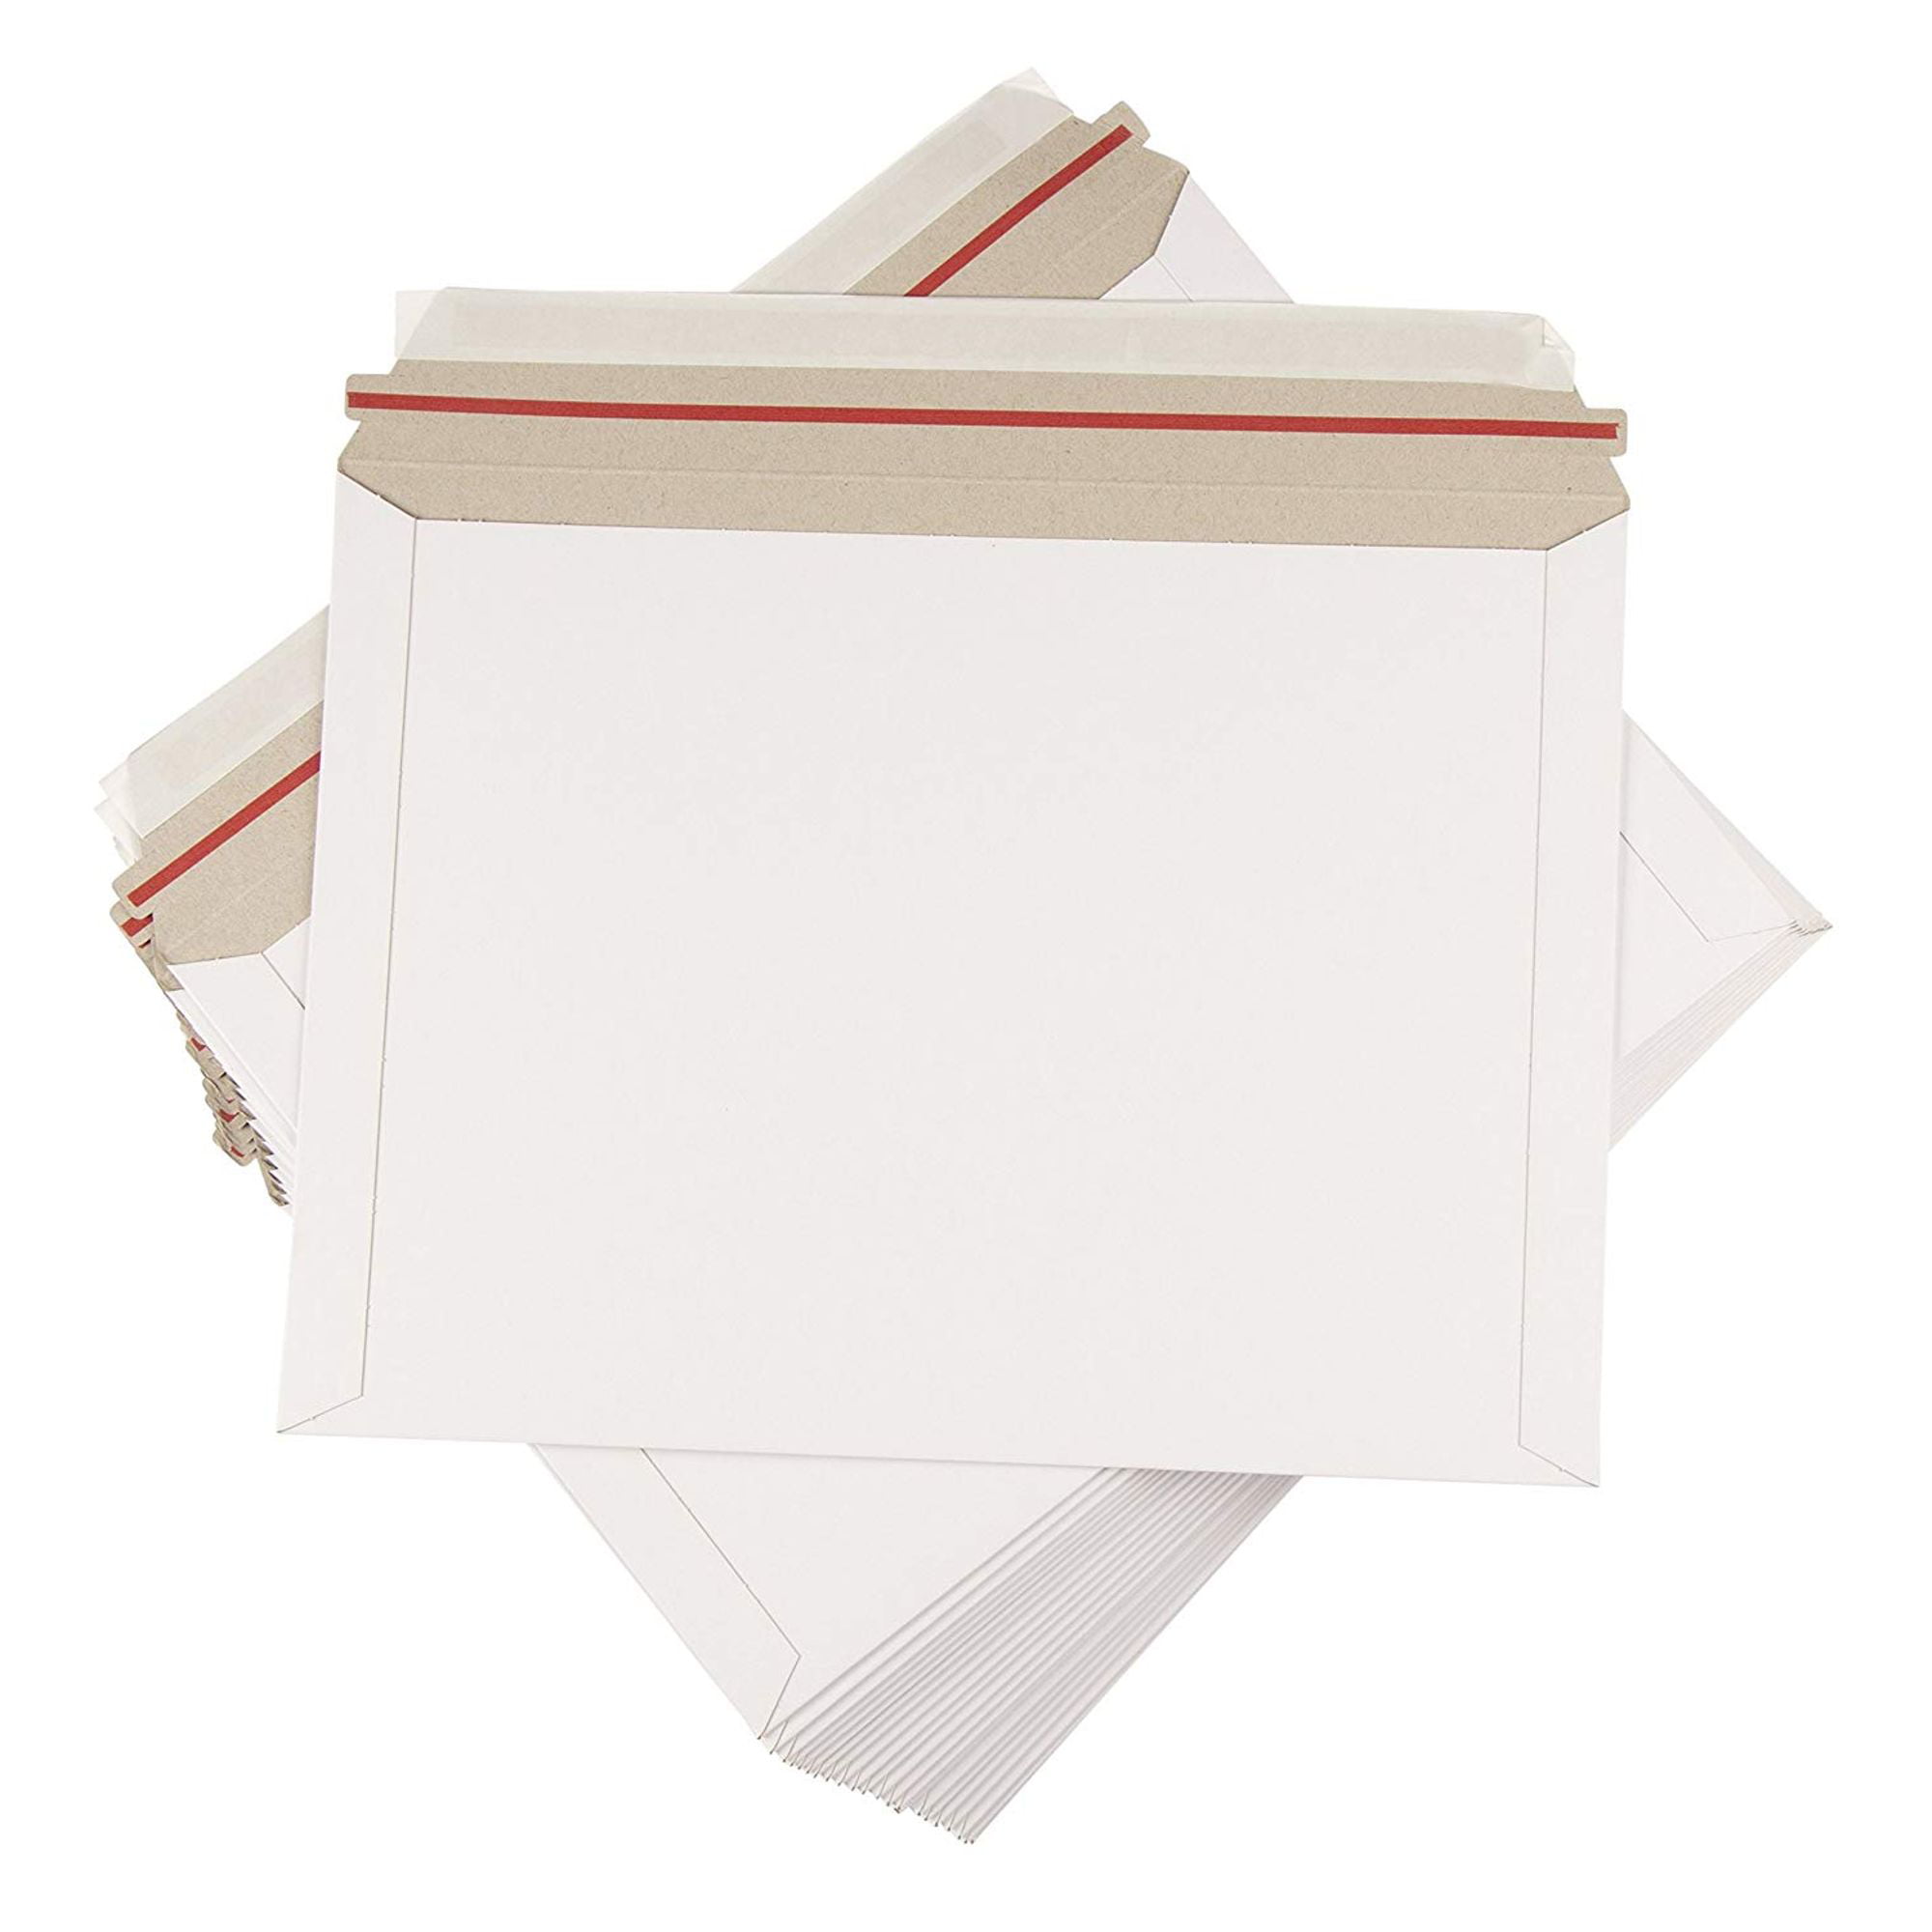 200 6x8 RIGID PHOTO DOCUMENT CARD MAILERS ENVELOPES STAY FLATS 100/% RECYCLABLE